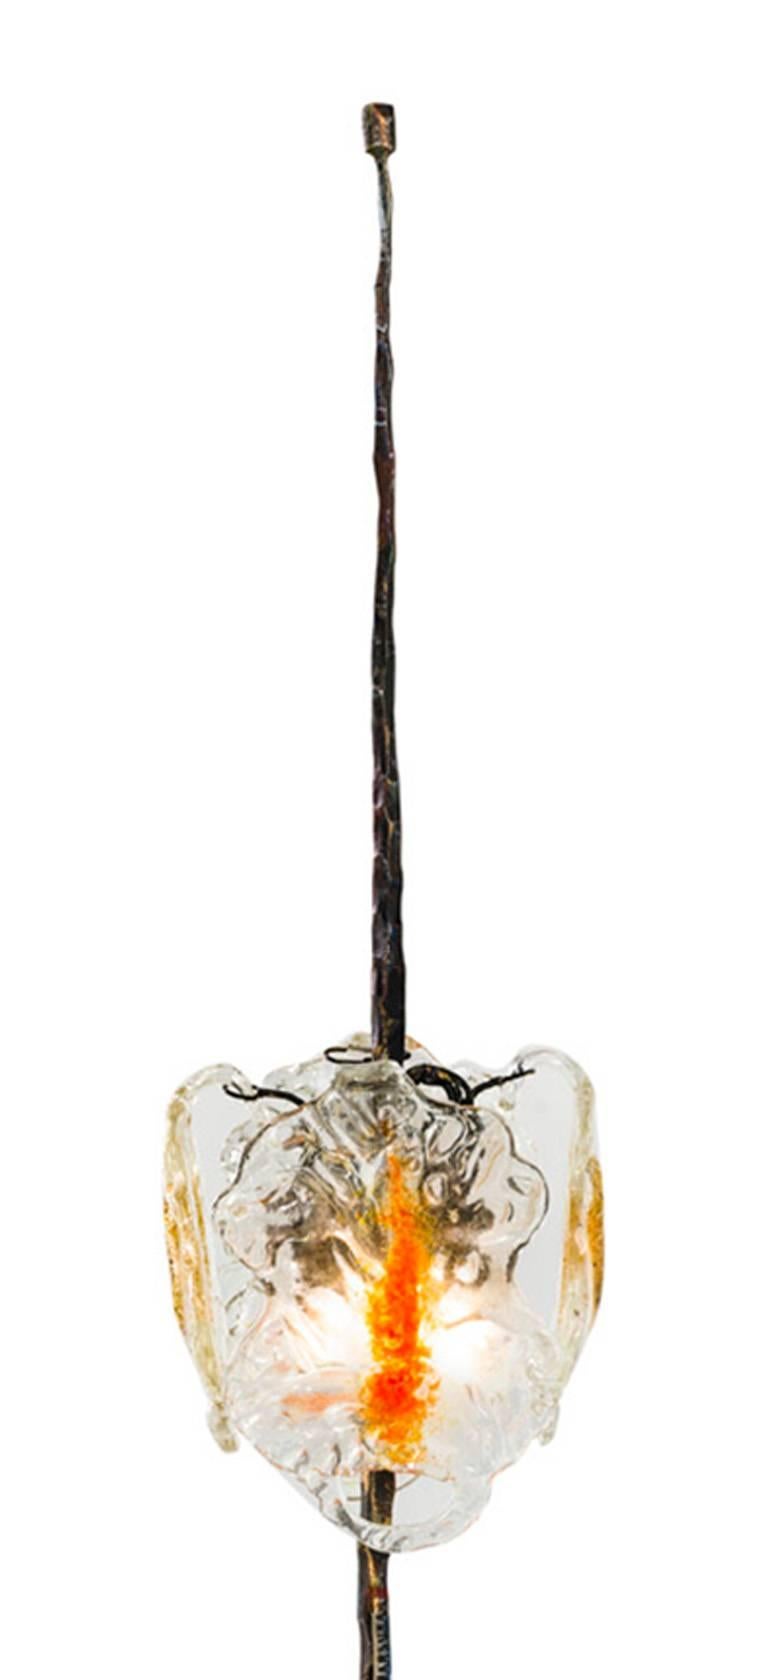 Floor lamp by Salvino Marsura
Hand-forged wrought iron with four hanging Murano glass petals which form the shade.
Made in Treviso, Italy.